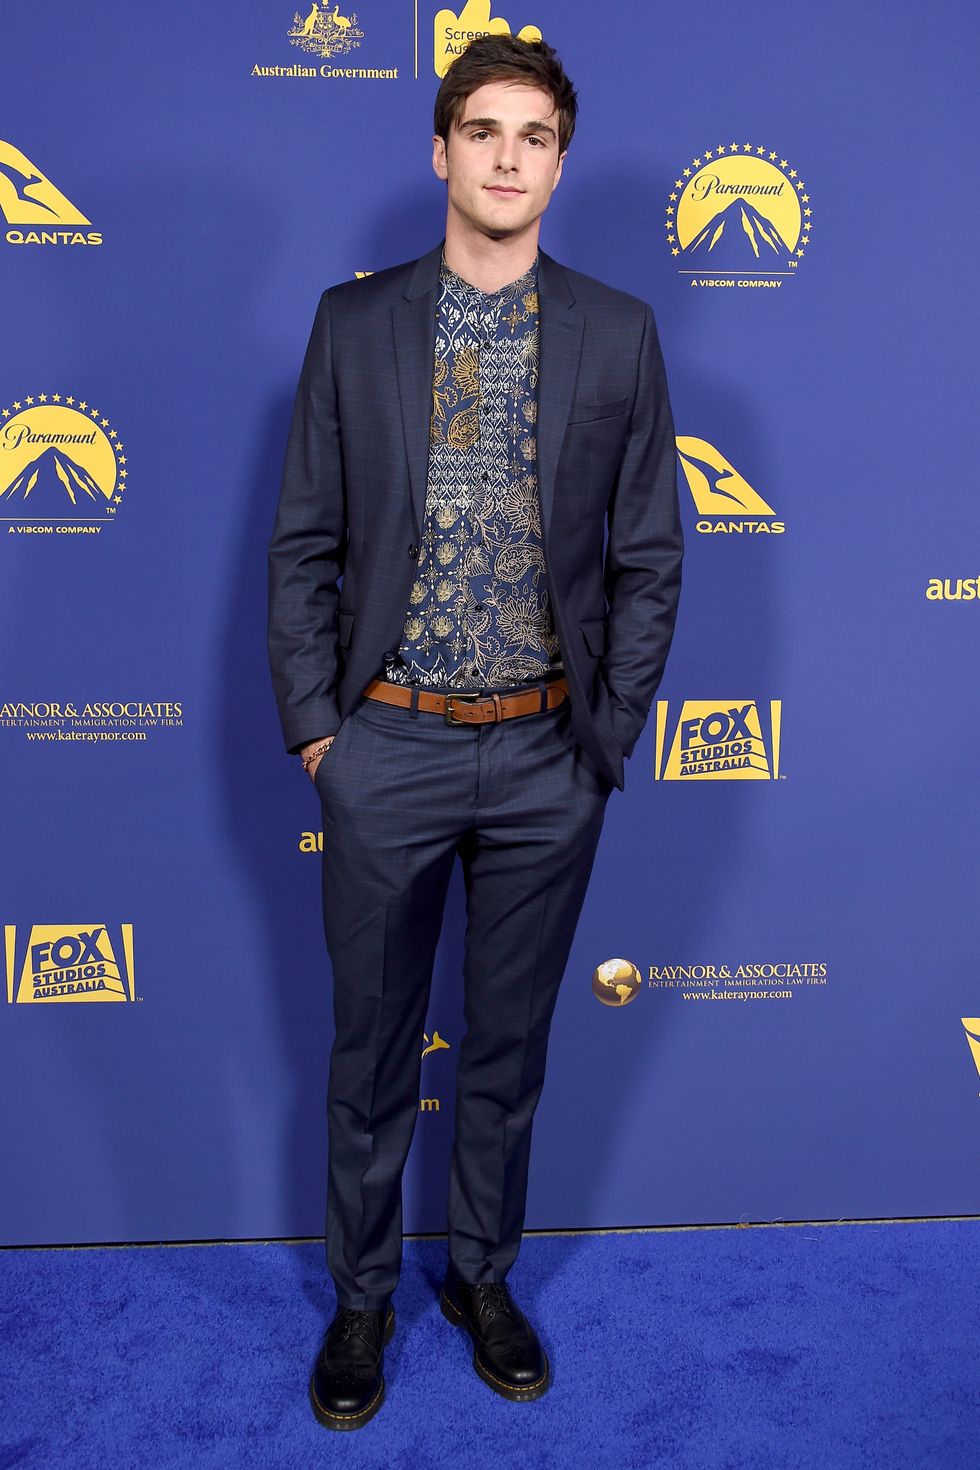 los angeles, ca october 24 actor jacob elordi arrives at the 7th annual australians in film award benefit dinner at paramount studios on october 24, 2018 in los angeles, california photo by gregg deguiregetty images